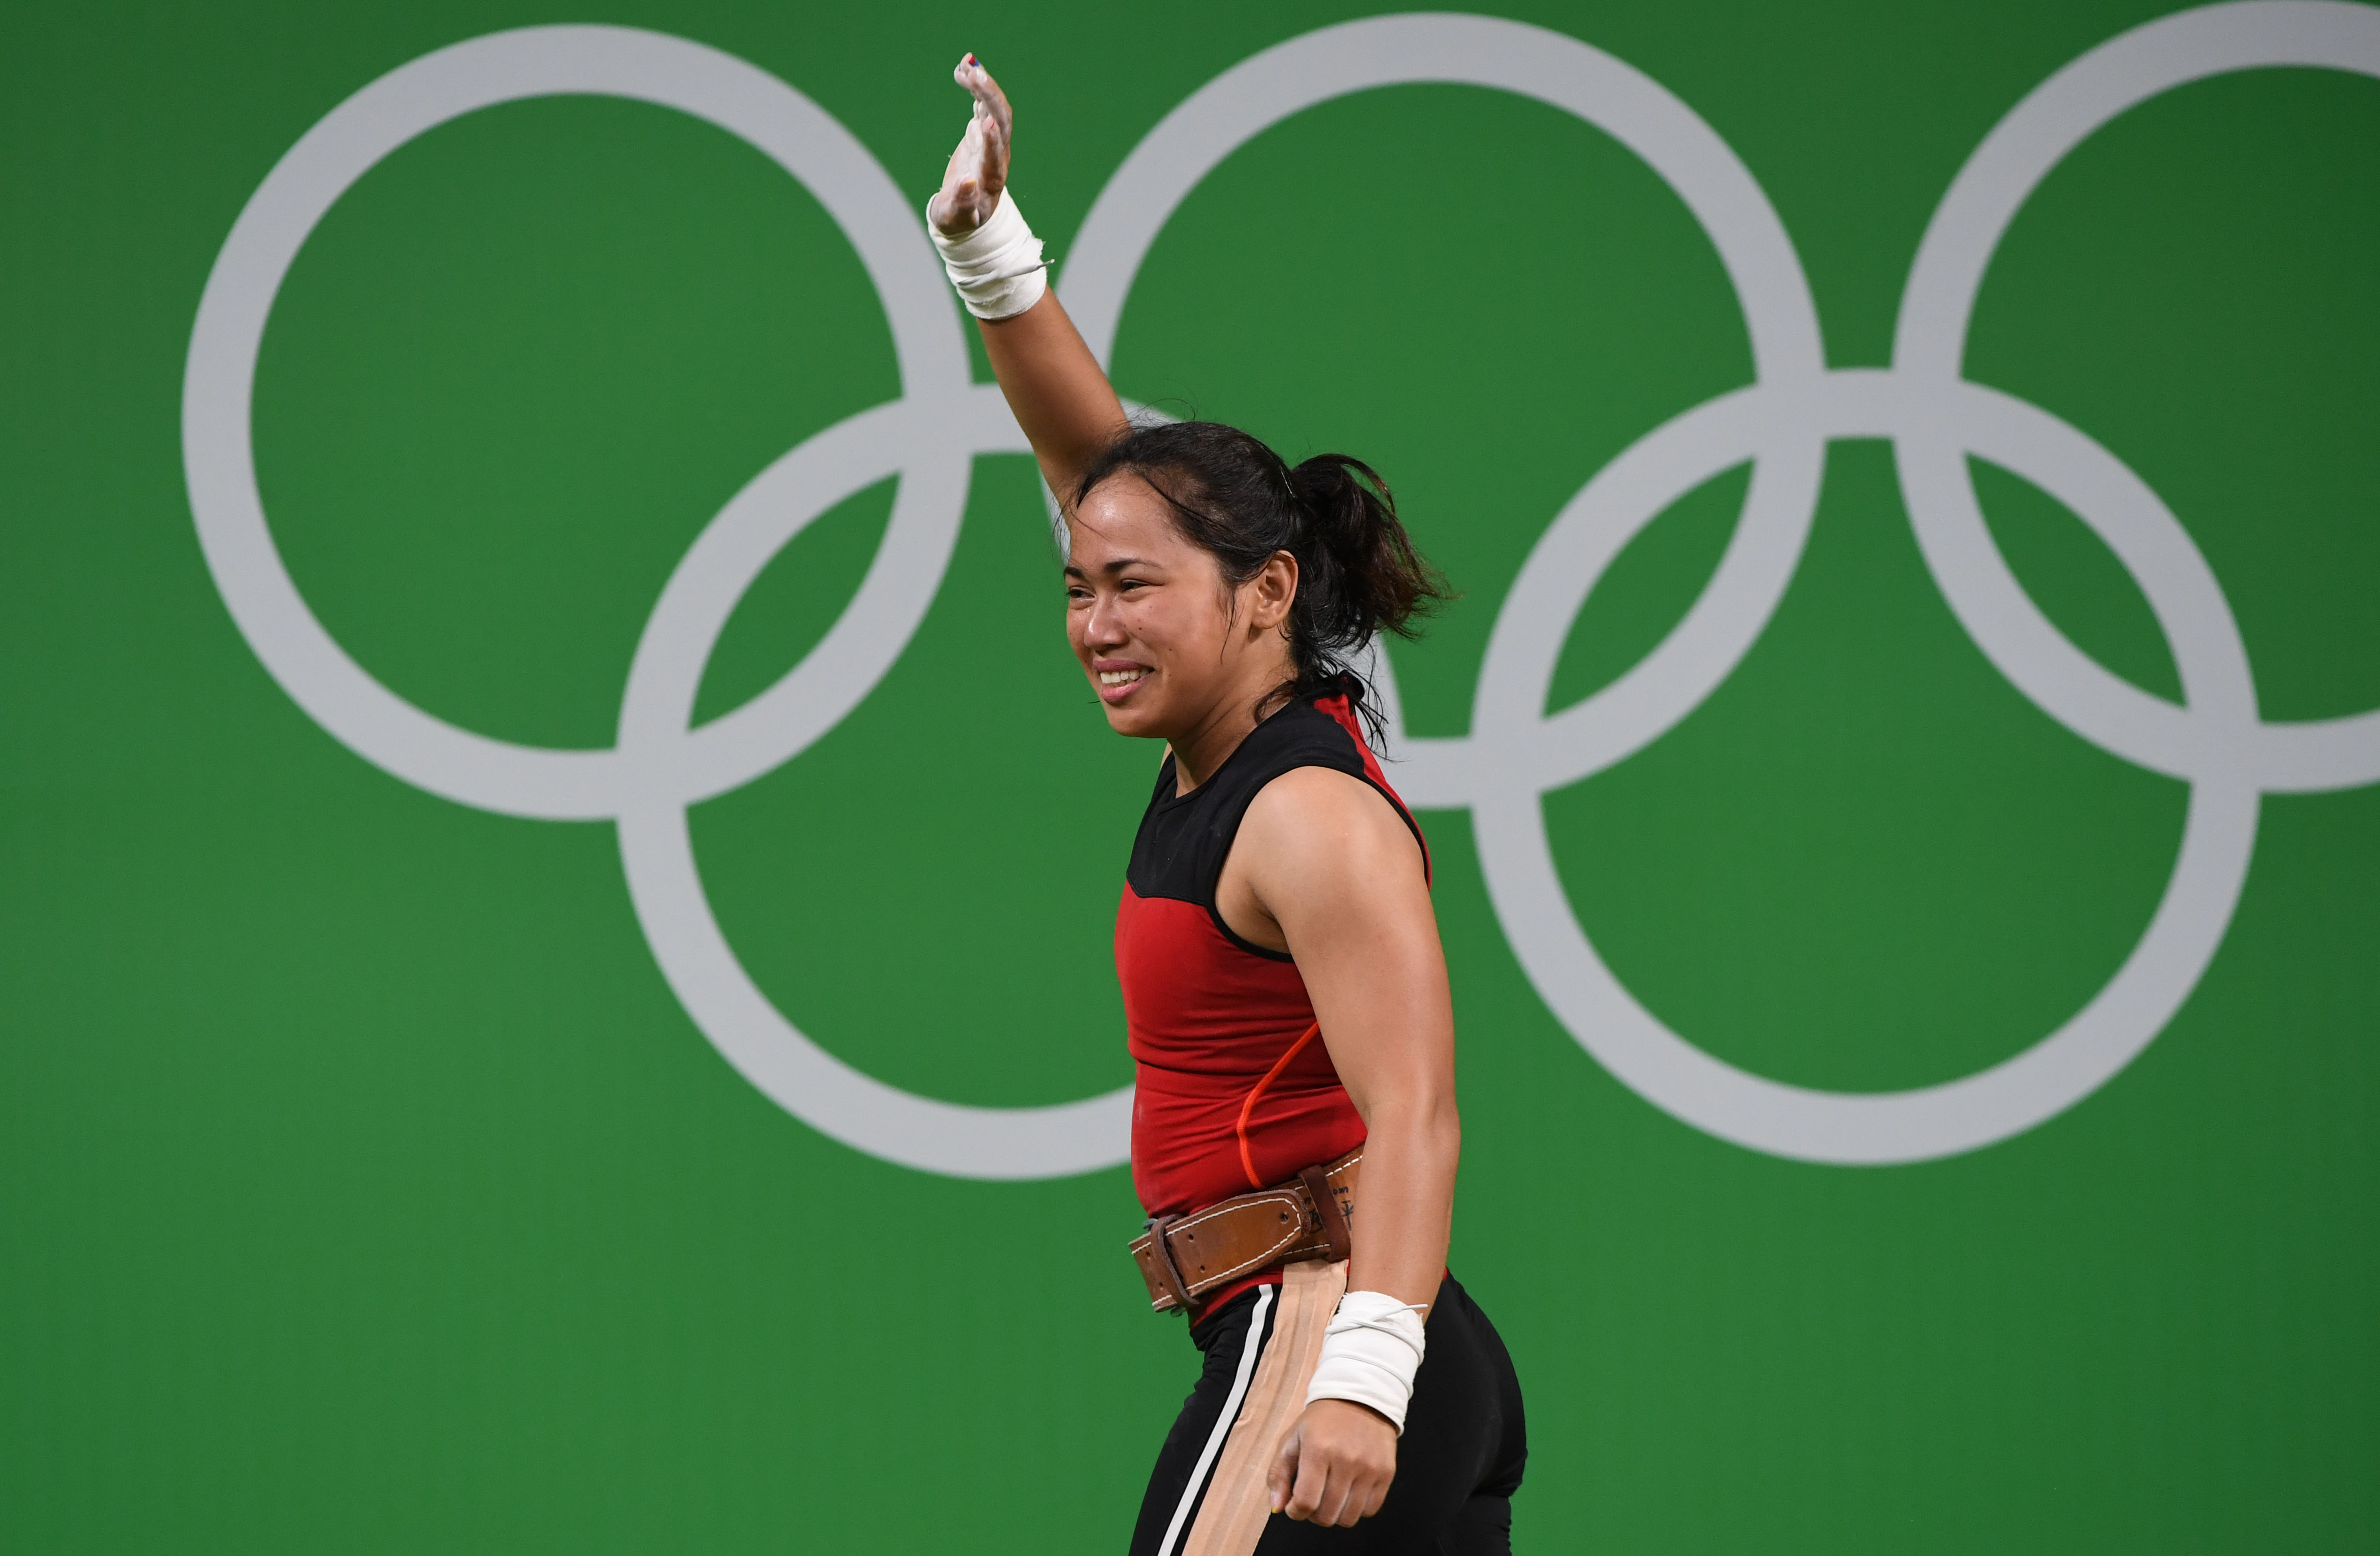 Philippines' Hidilyn Diaz celebrates during the women's 53kg weightlifting event at the Rio 2016 Olympic games in Rio de Janeiro on August 7, 2016. / AFP PHOTO / GOH Chai Hin